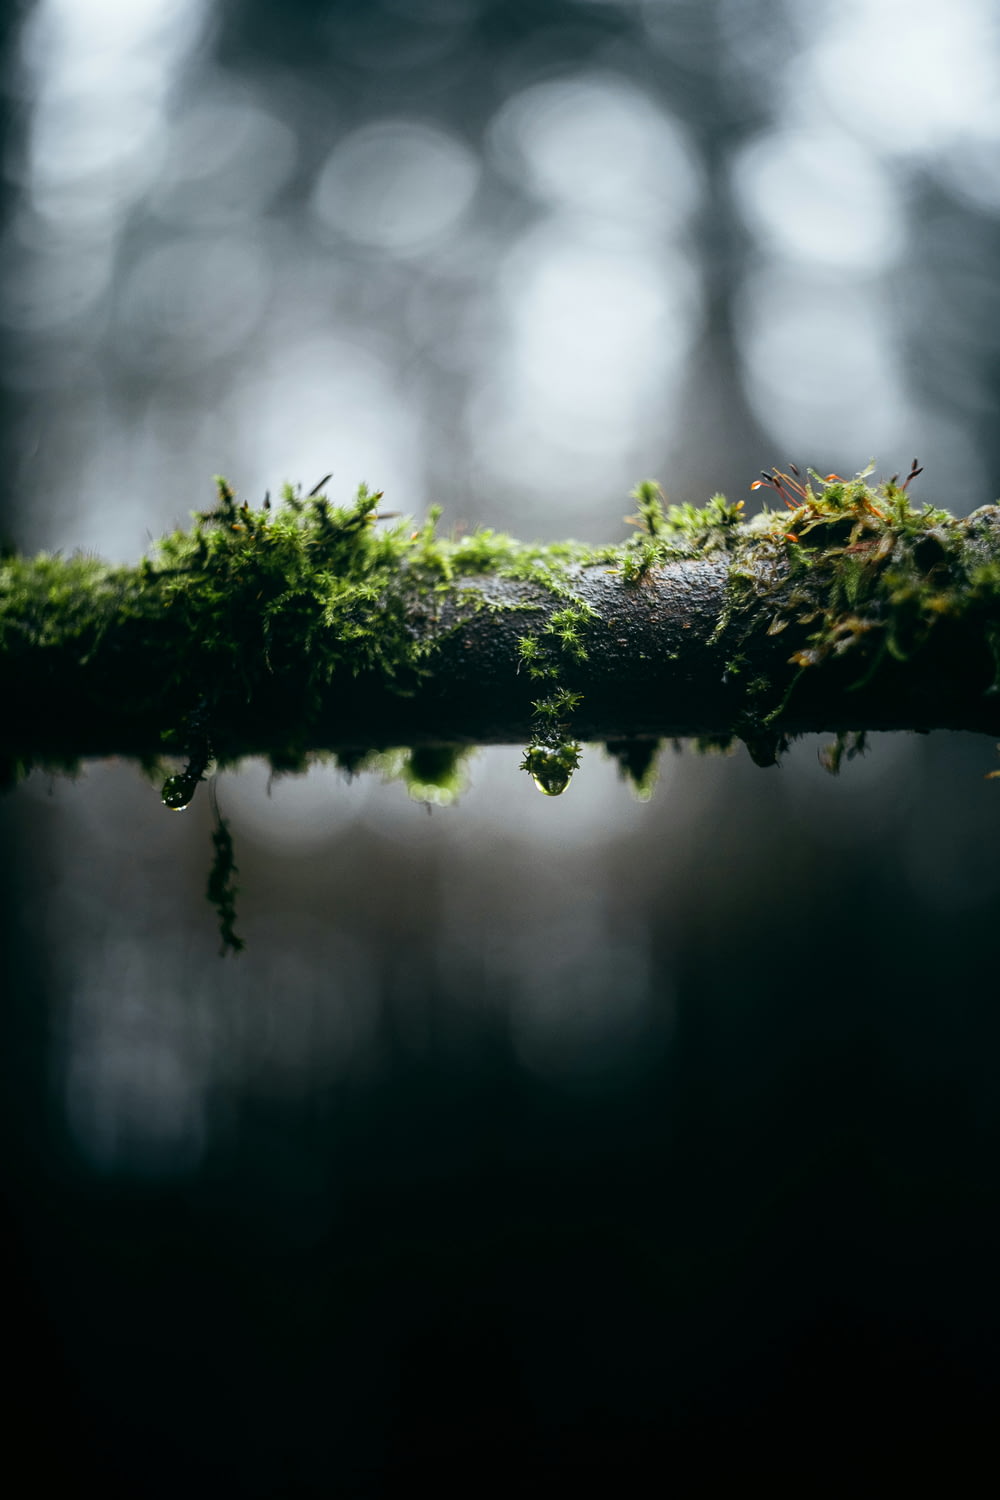 moss growing on a branch in a forest